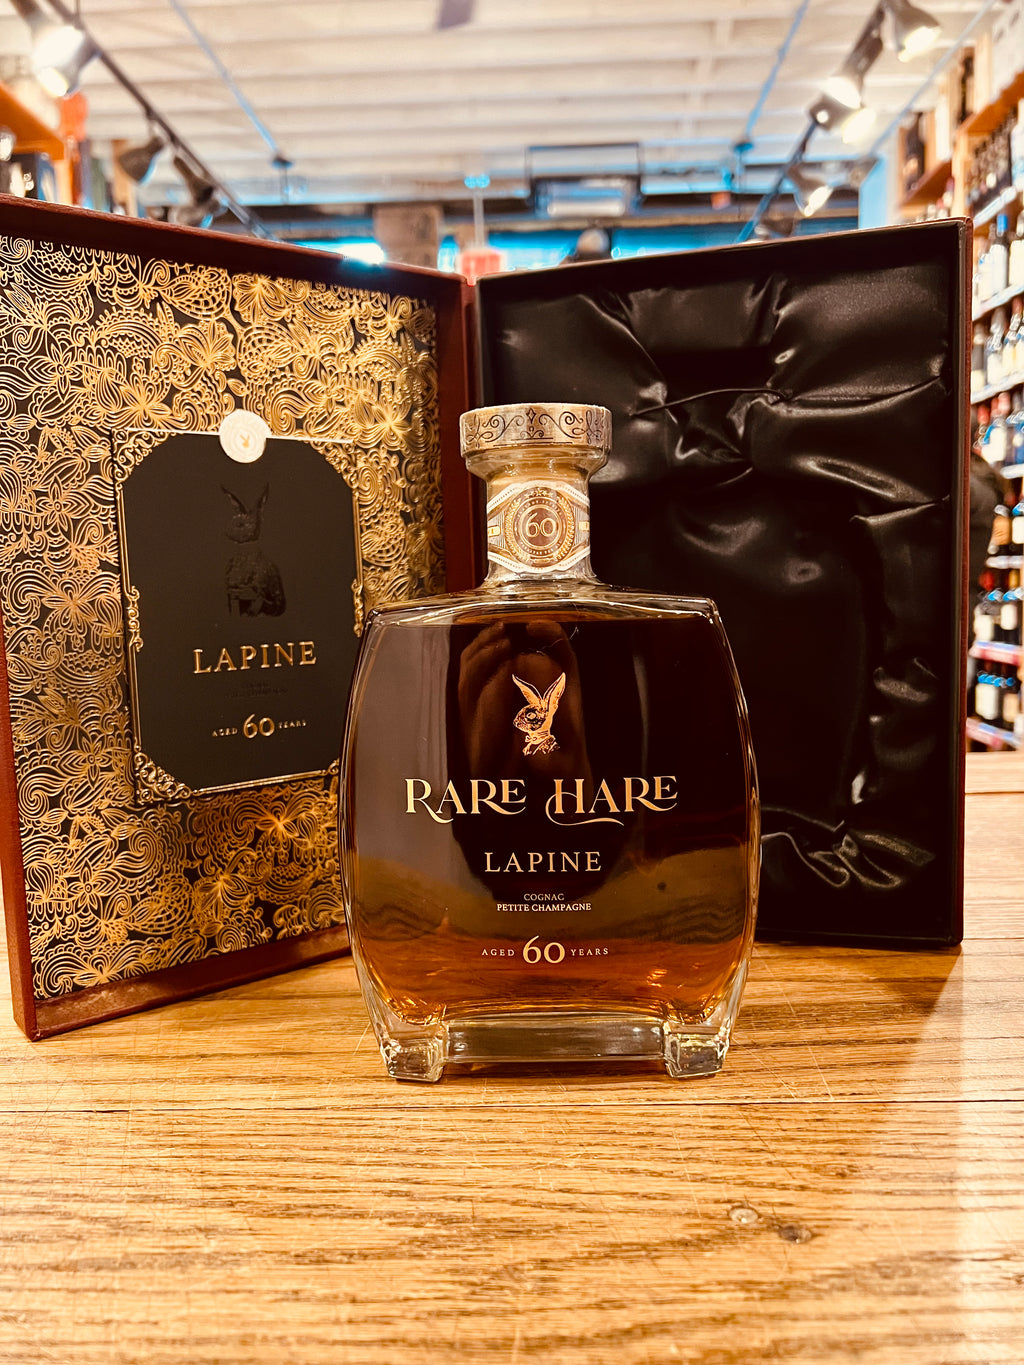 Rare Hare Cognac Lapine Aged 60 Years 750mL an open box with one side being lined in black velvet while to other being lined in an intricate golden design with a squared short glass bottle with gold lettering and a golden top in front of the open box